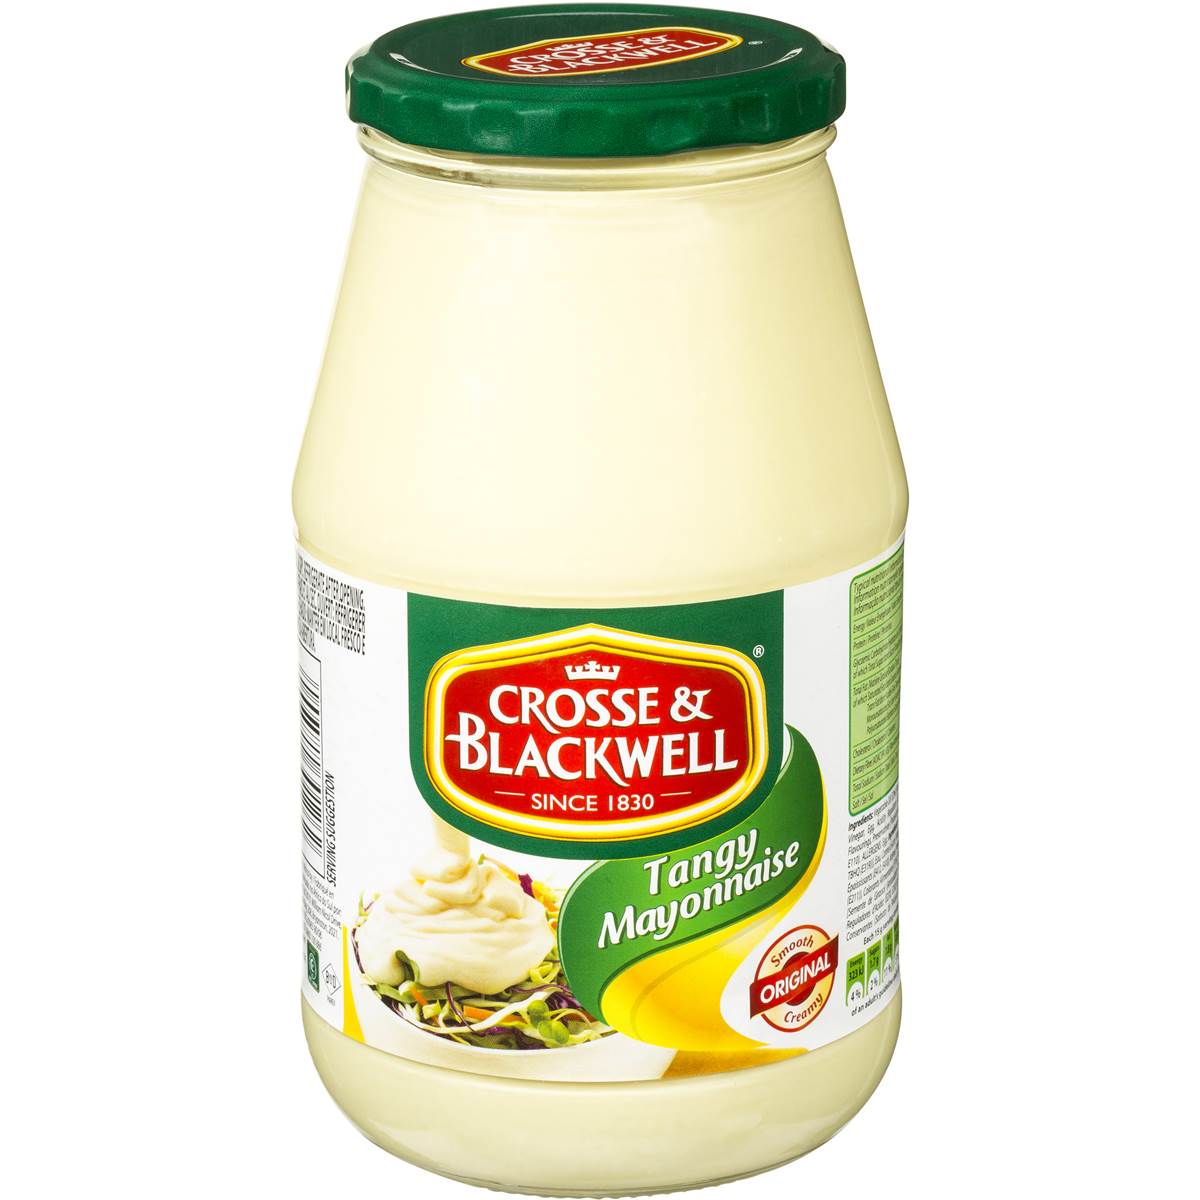 Calories in Crosse & Blackwell South African Mayonnaise